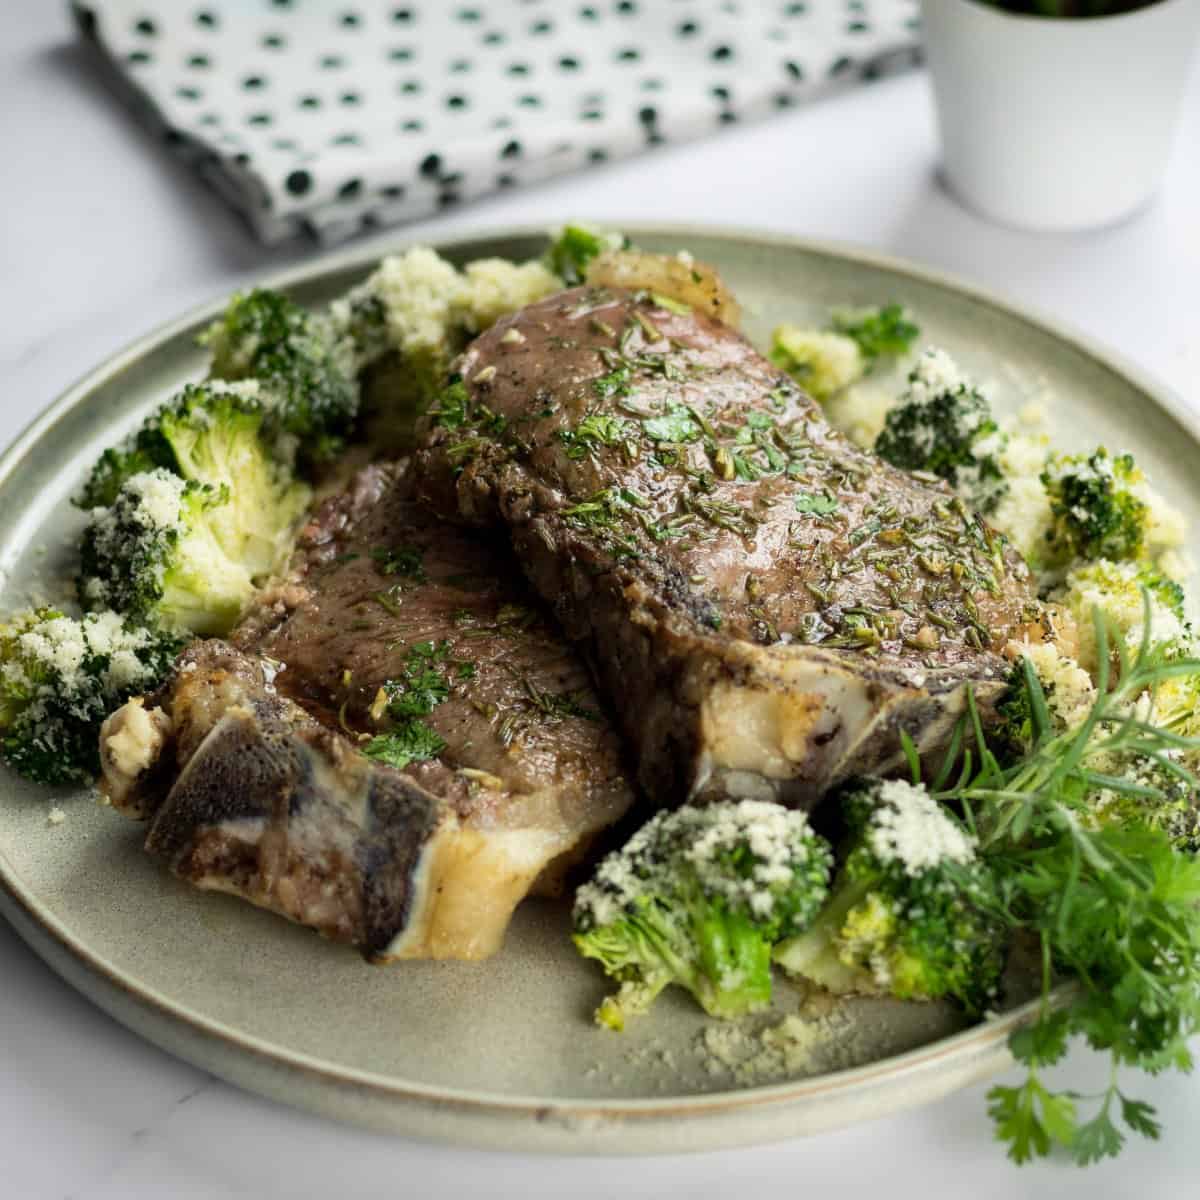 Oven baked ribeye steak recipe with cheesy roasted broccoli served on a plate.